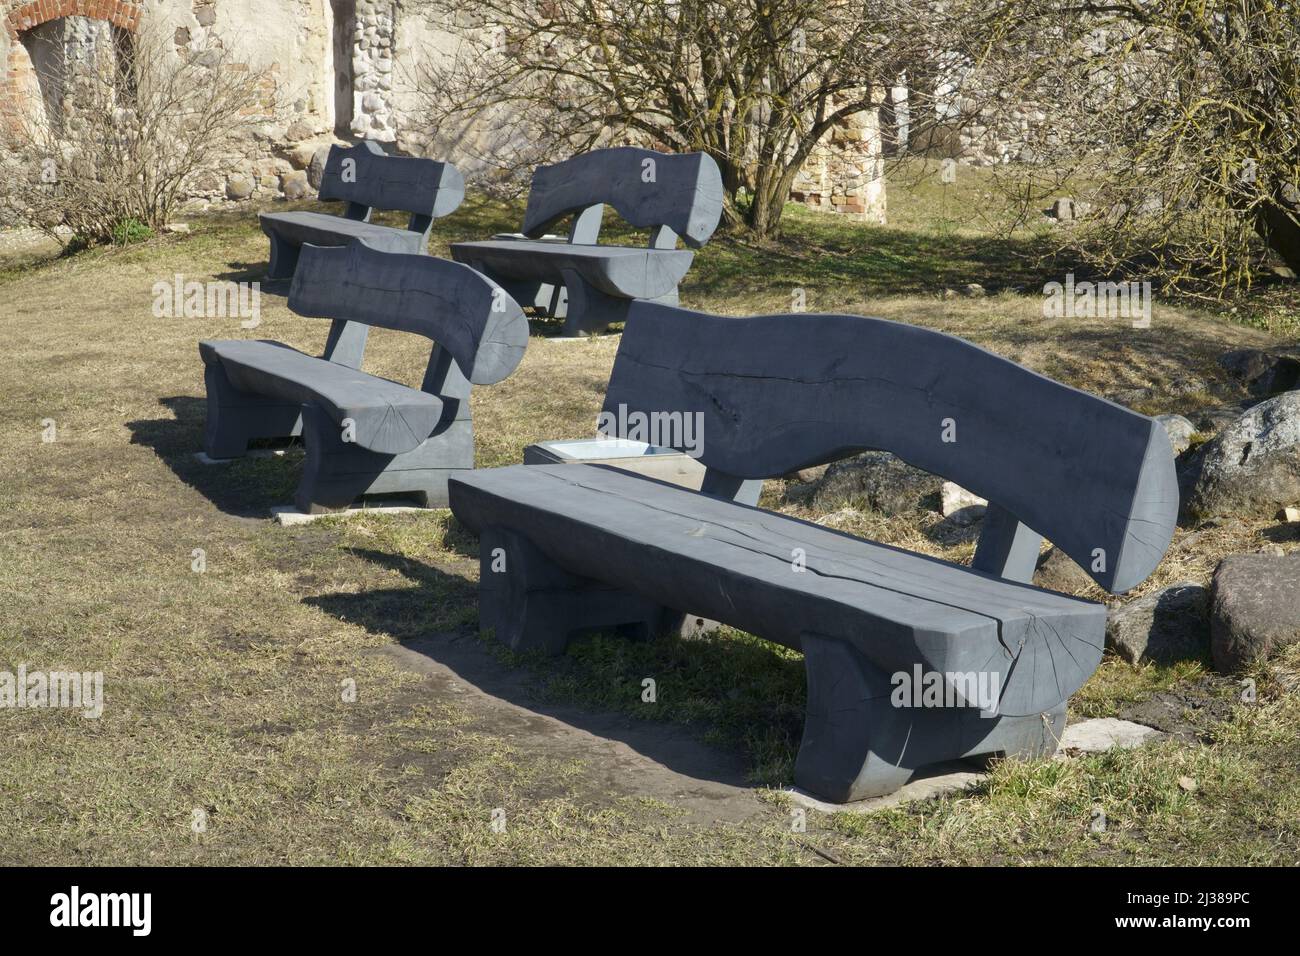 Landscape design with rustic wooden benches in the historic urban environment. Carpentry joinery handicrafts which made of round wood logs timber. Stock Photo